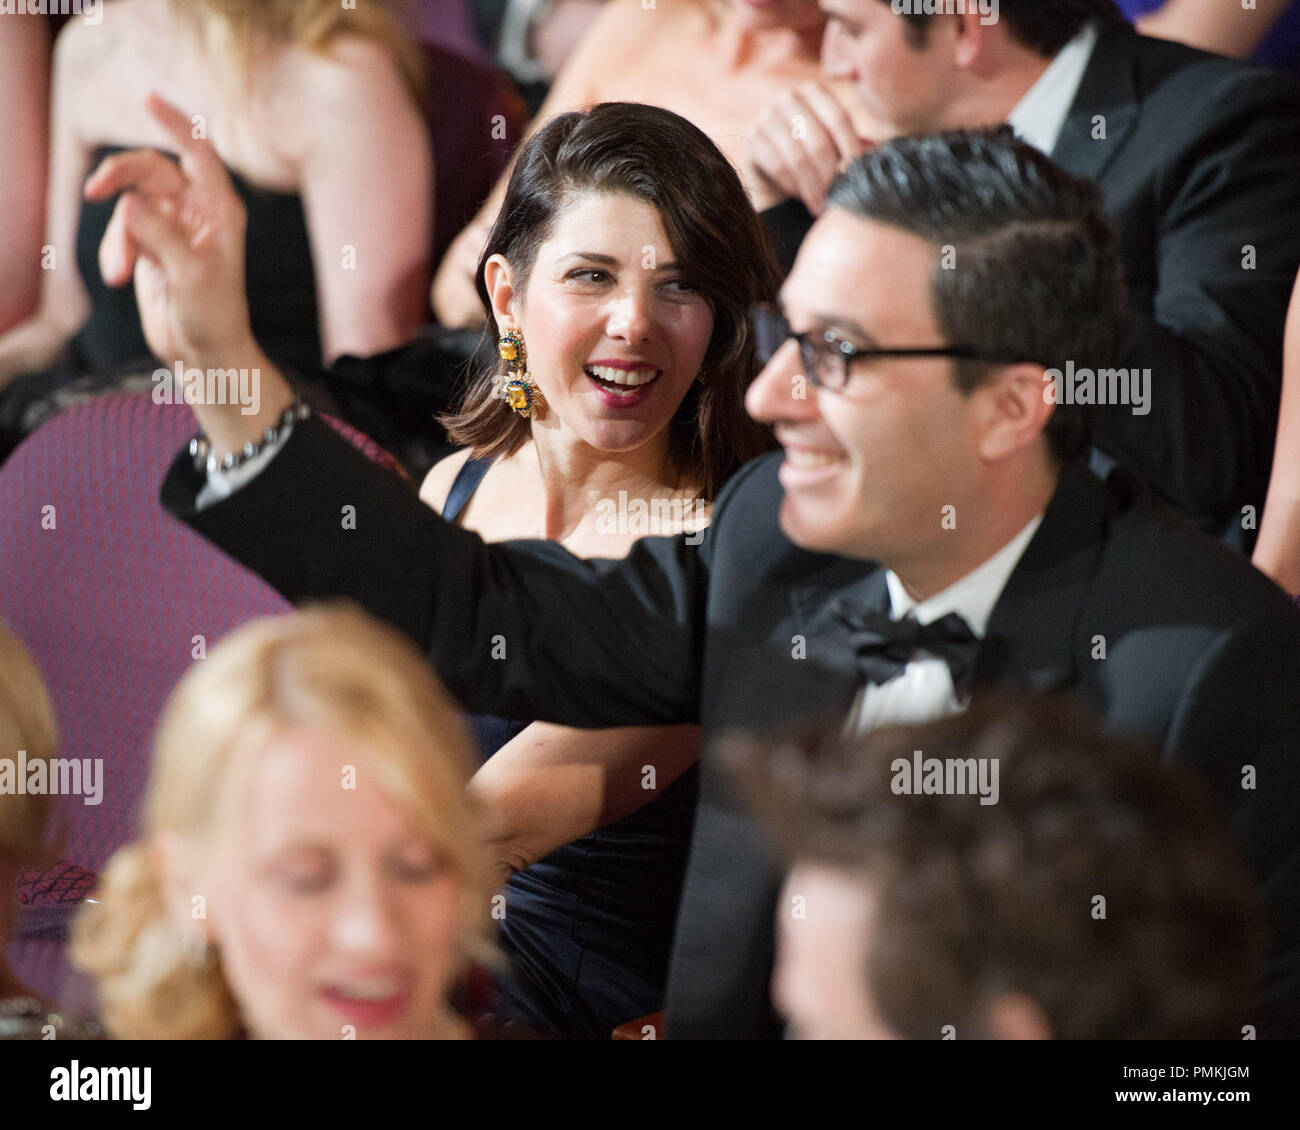 Marisa Tomei attends the live ABC Television Network broadcast of the 83rd Annual Academy Awards from the Kodak Theatre in Hollywood, CA Sunday, February 27, 2011.  File Reference # 30871 362  For Editorial Use Only -  All Rights Reserved Stock Photo